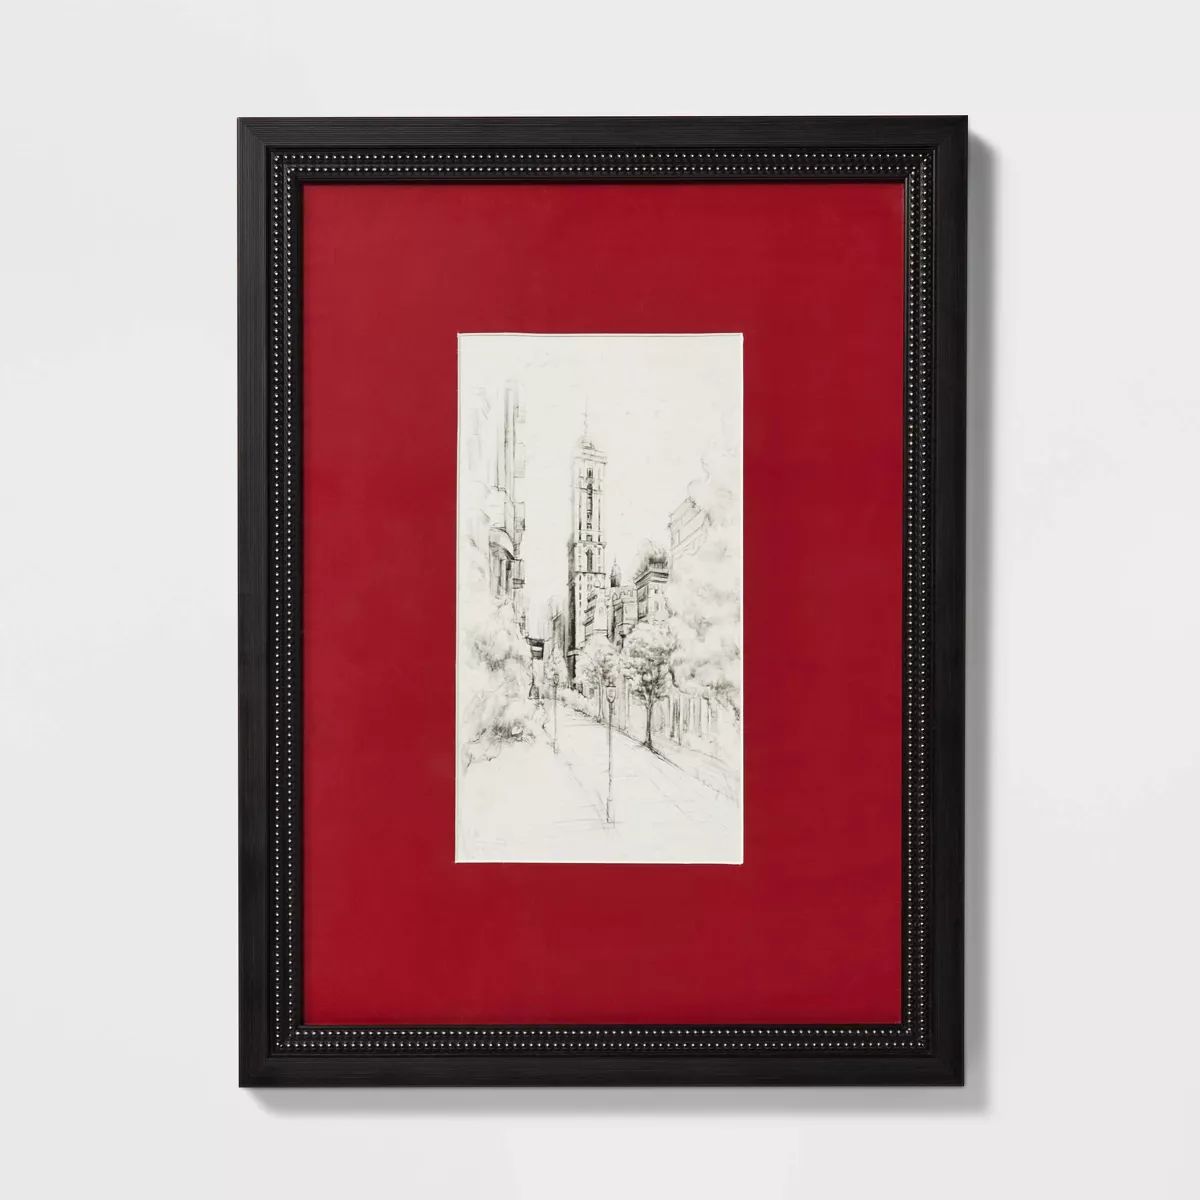 18" x 24" Vintage City Sketch Framed Wall Art - Threshold™ designed with Studio McGee | Target